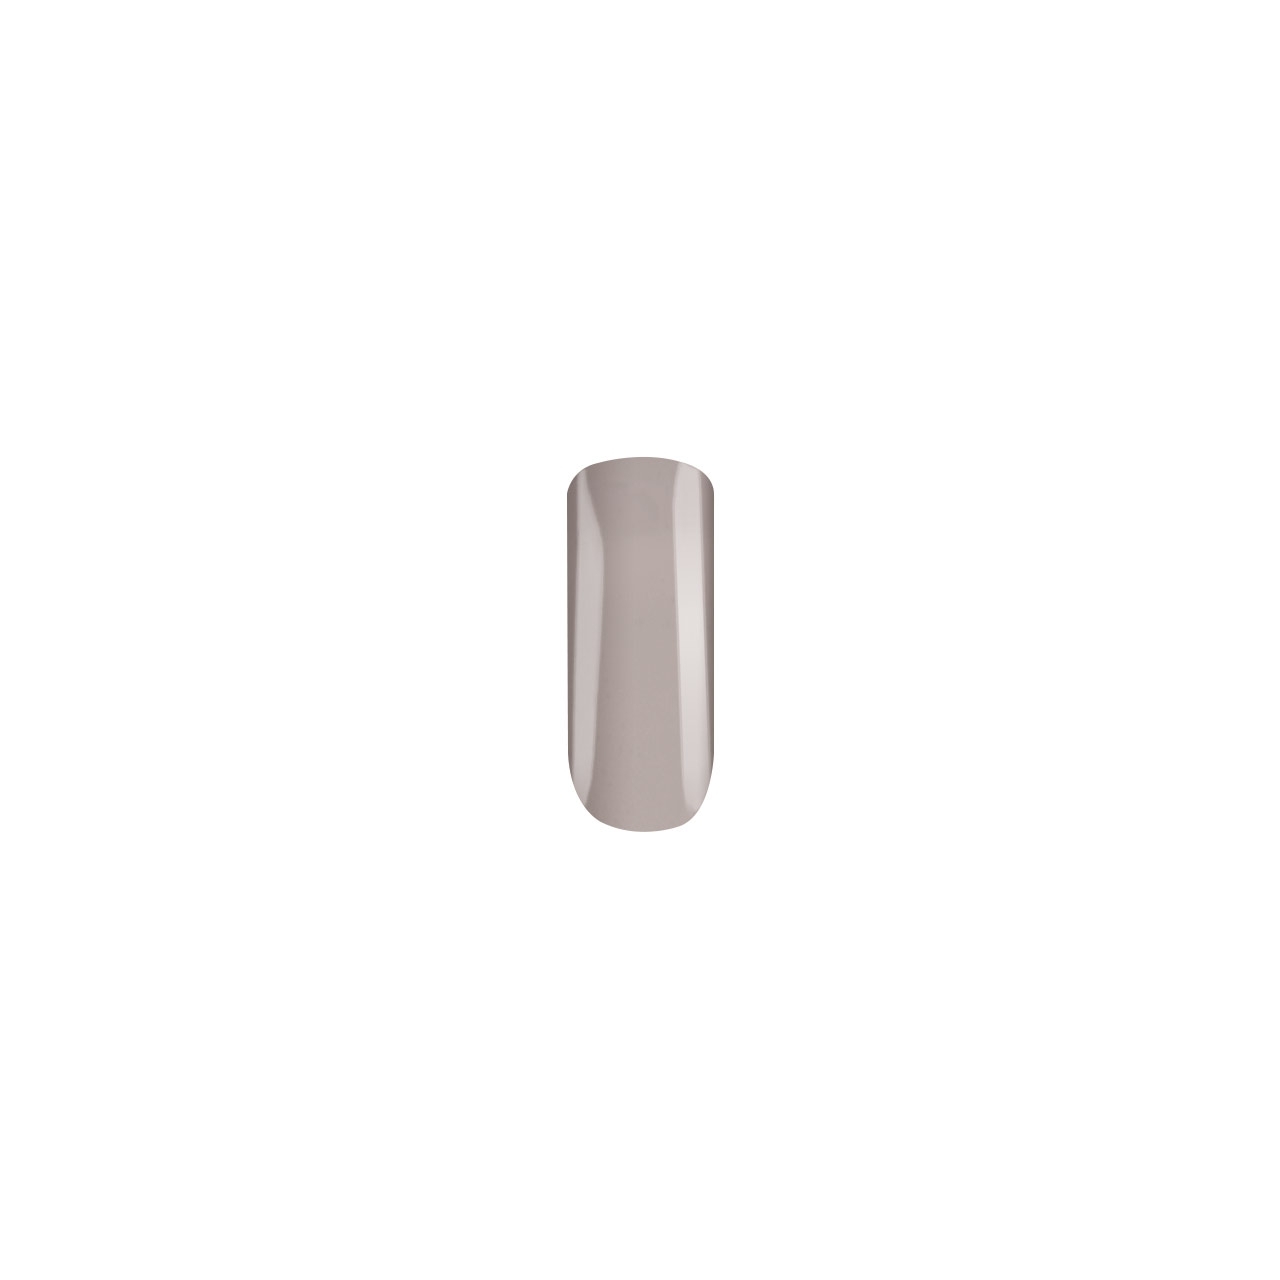 BAEHR BEAUTY CONCEPT - NAILS Nagellack coffee nude 11 ml